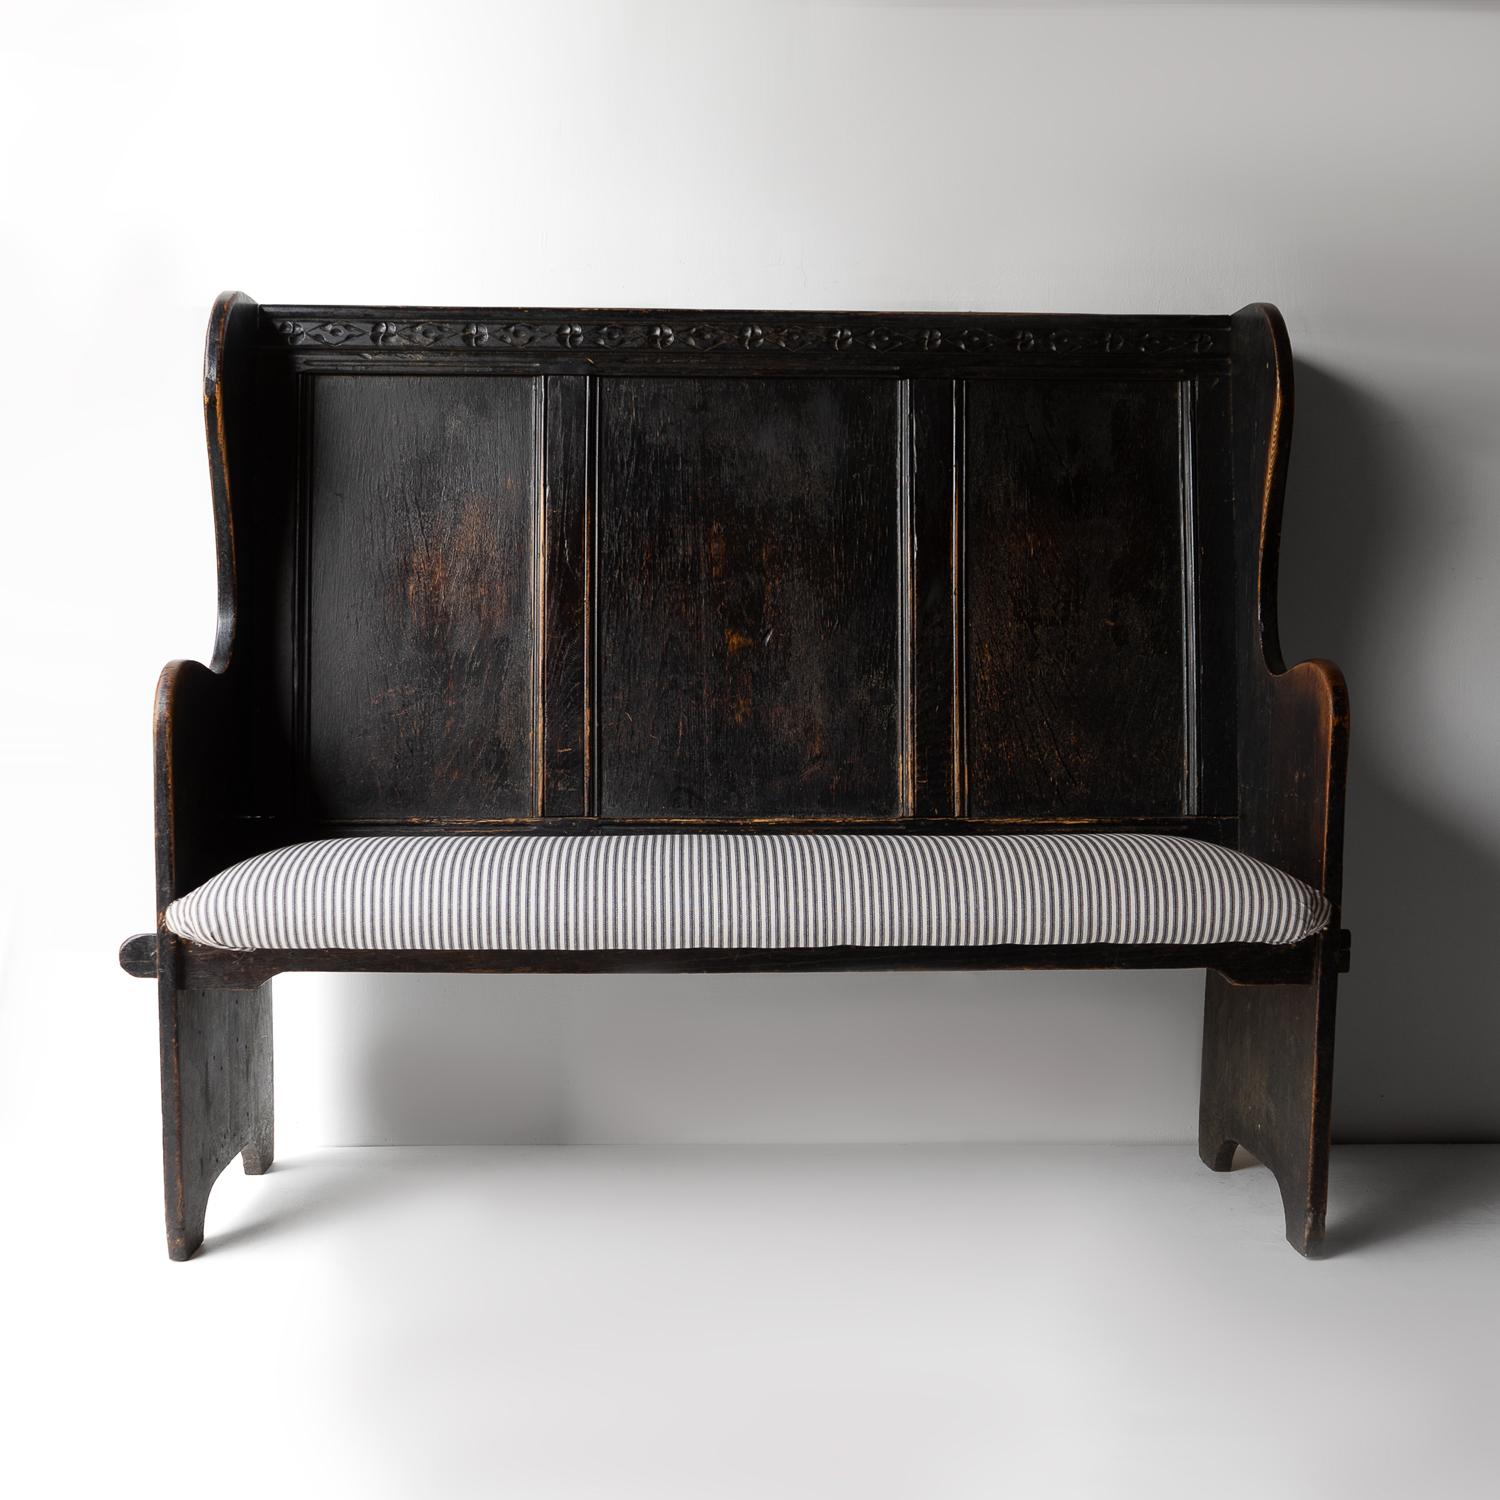 Antique Carved Ebonised Oak Settle, Bench With Upholstered Seat, 19th Century 7